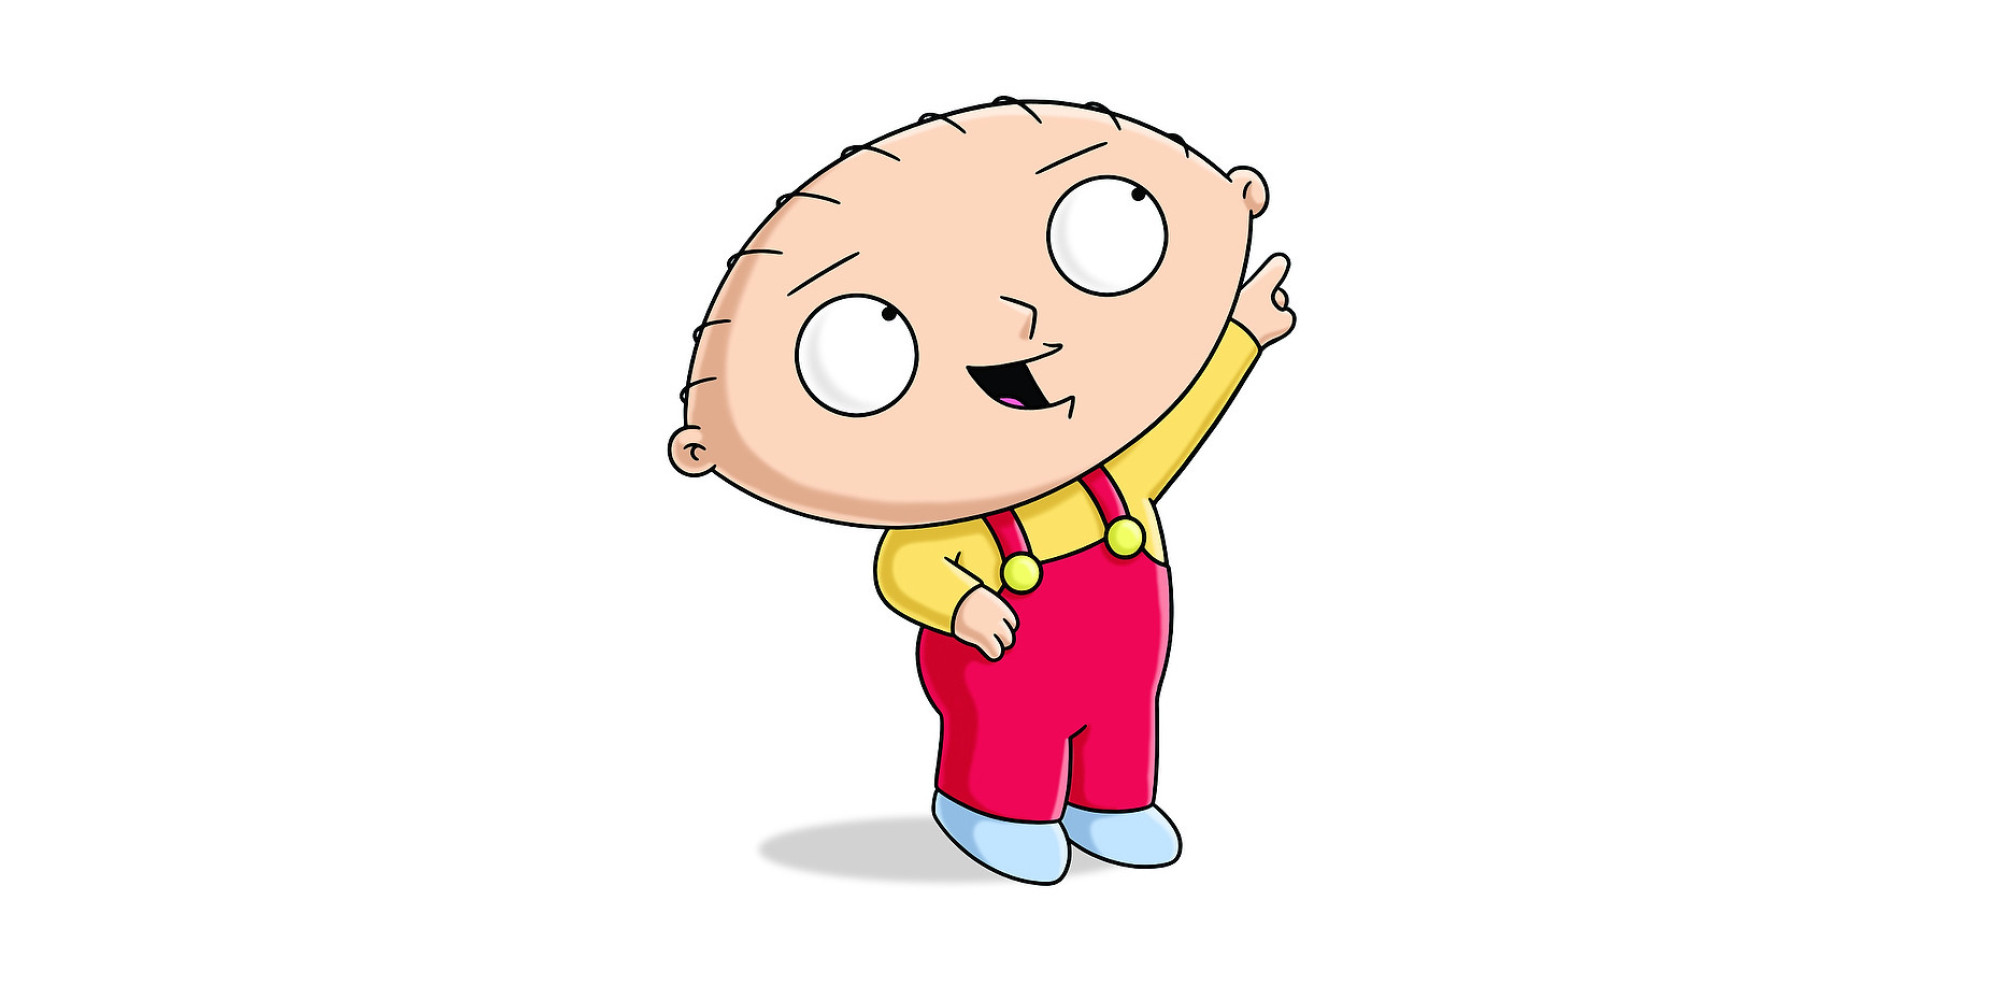 Stewie - Quotes of the Day